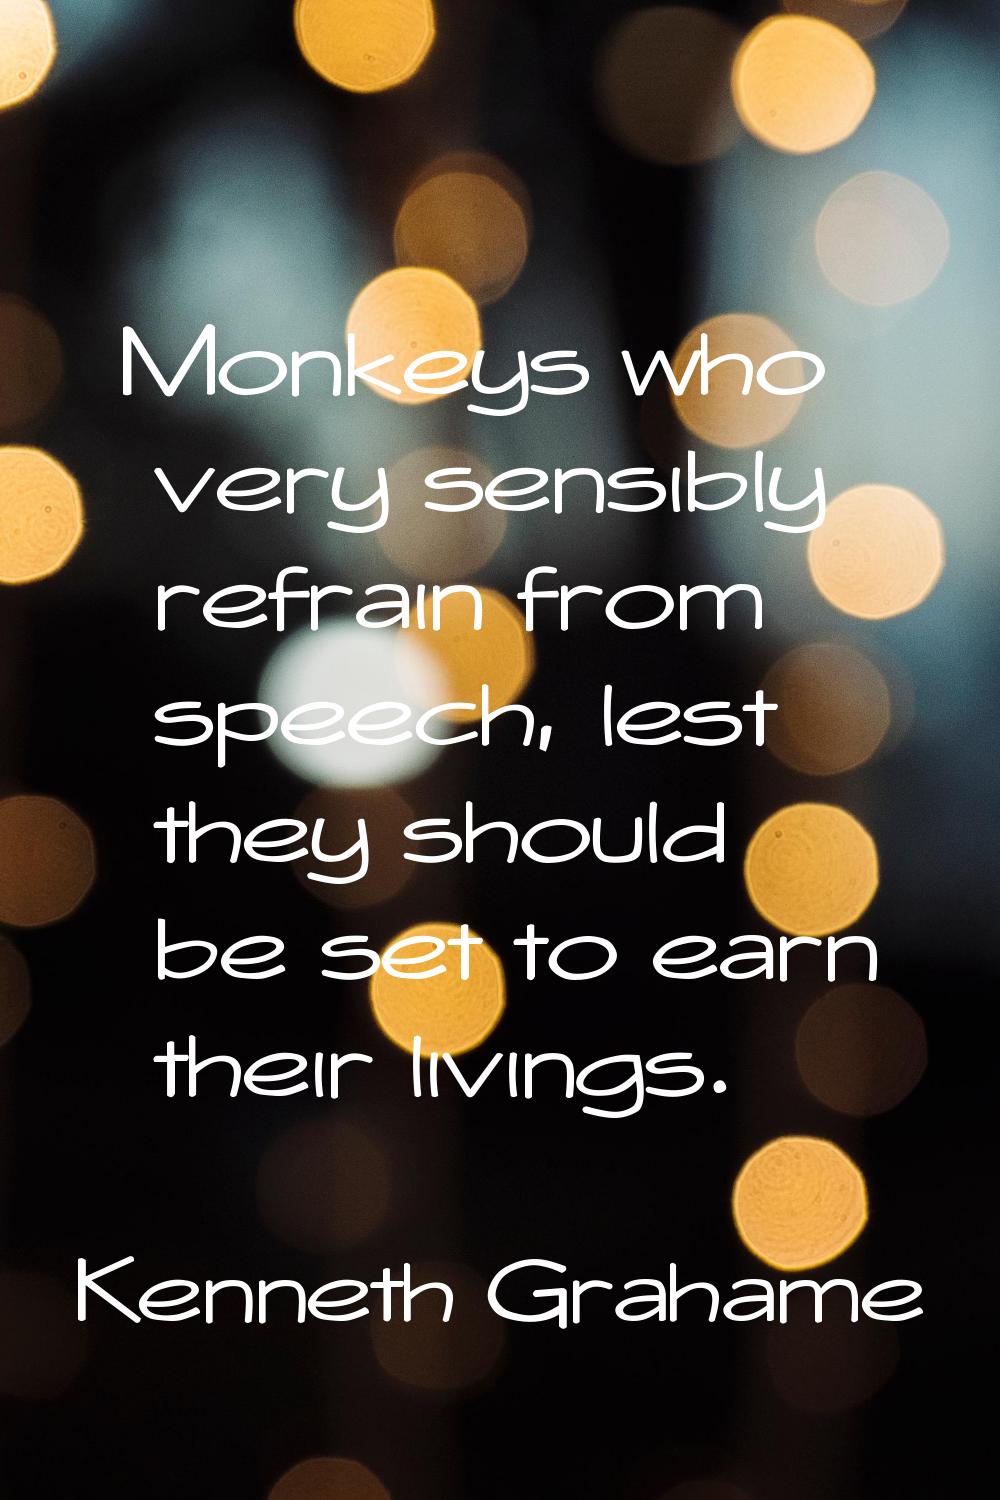 Monkeys who very sensibly refrain from speech, lest they should be set to earn their livings.